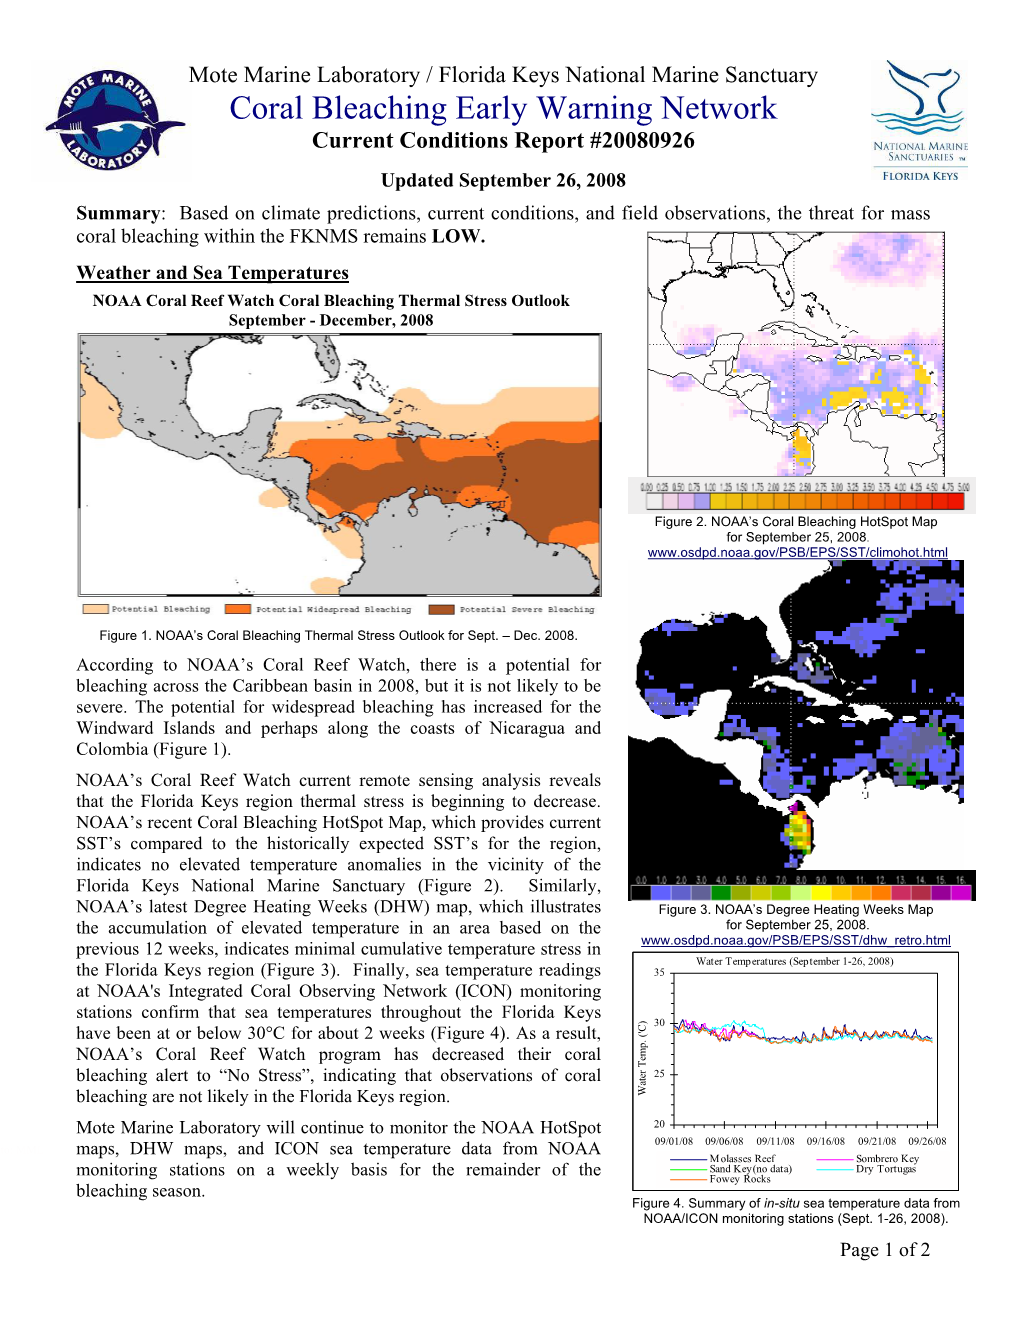 Coral Bleaching Early Warning Network Current Conditions Report #20080926